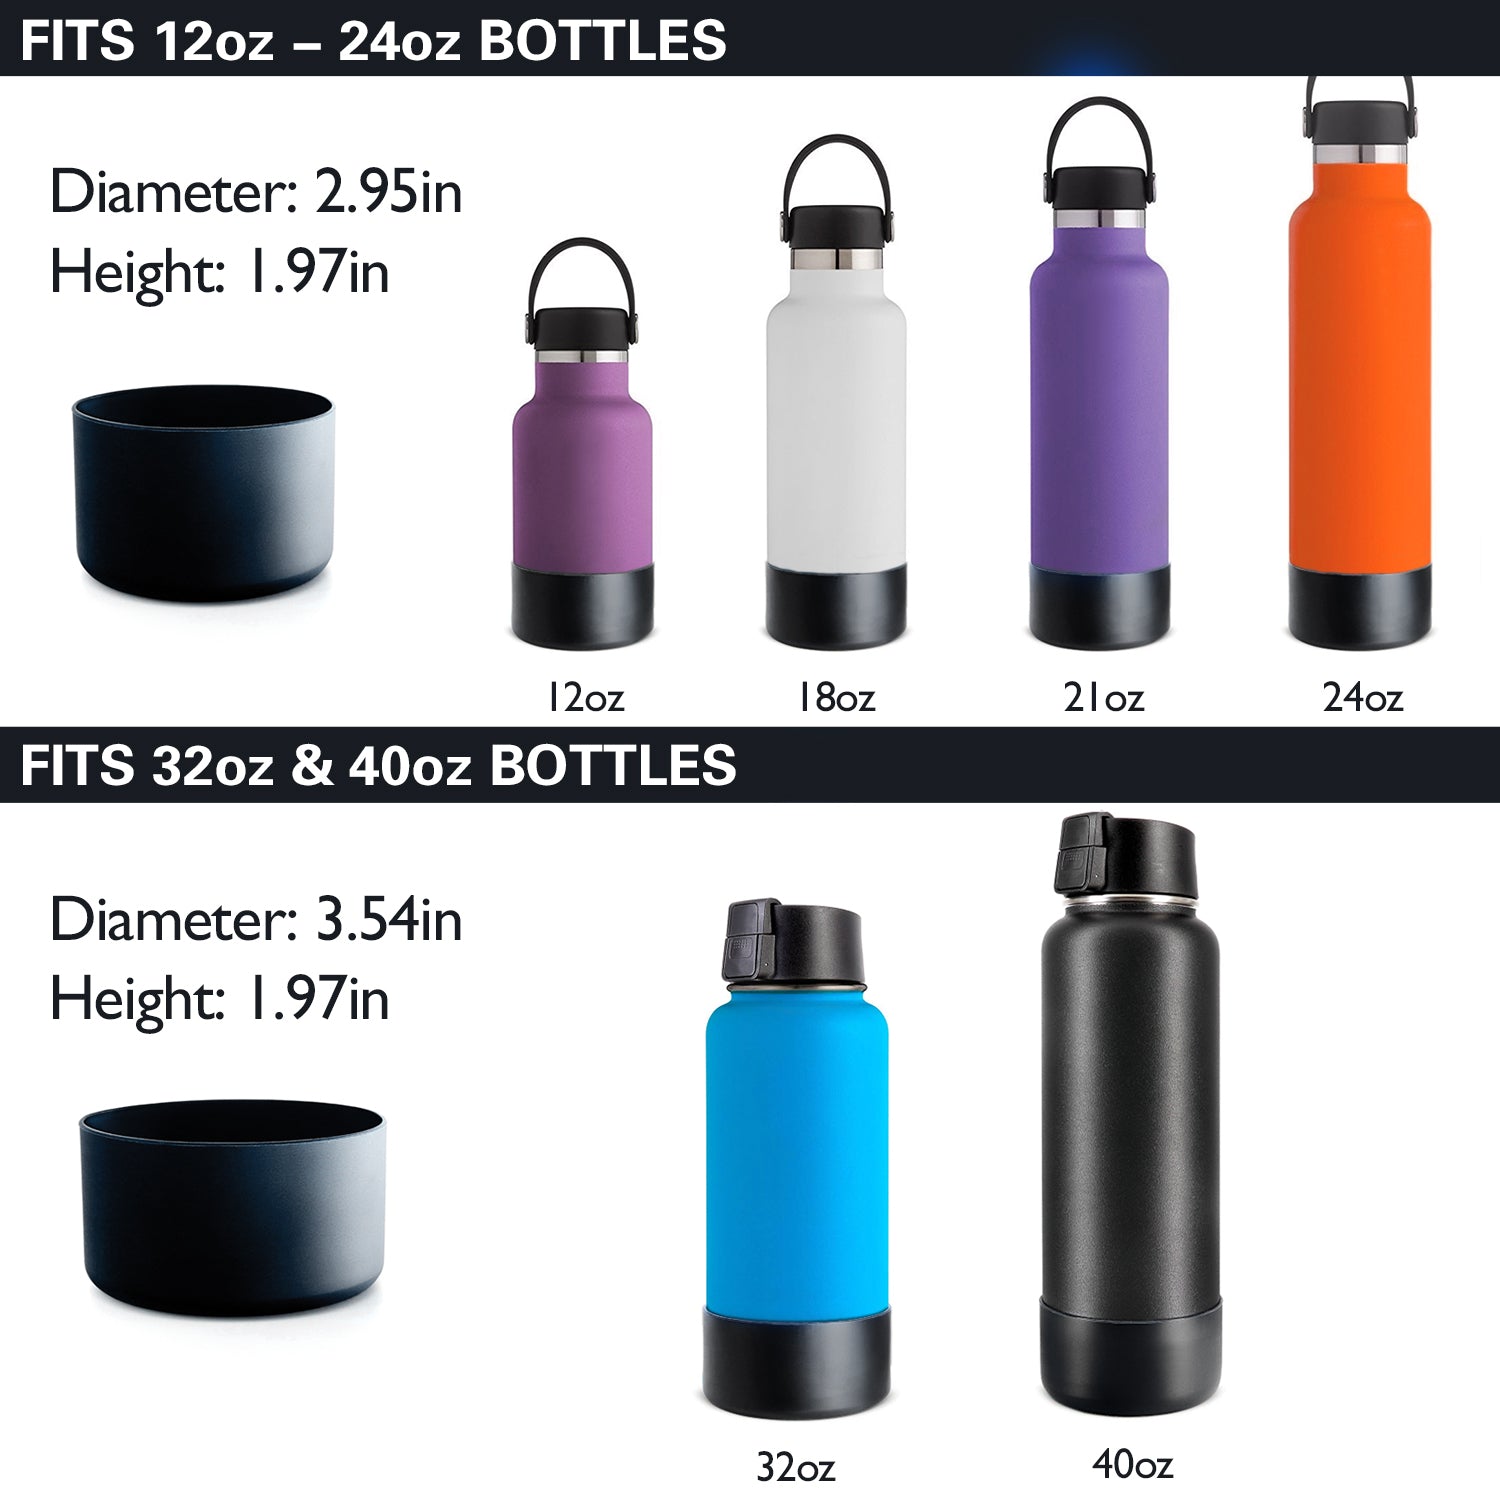 Silicone Protective Sleeve Boot For HYDRO FLASK 12-40oz Water Bottle  Accessories